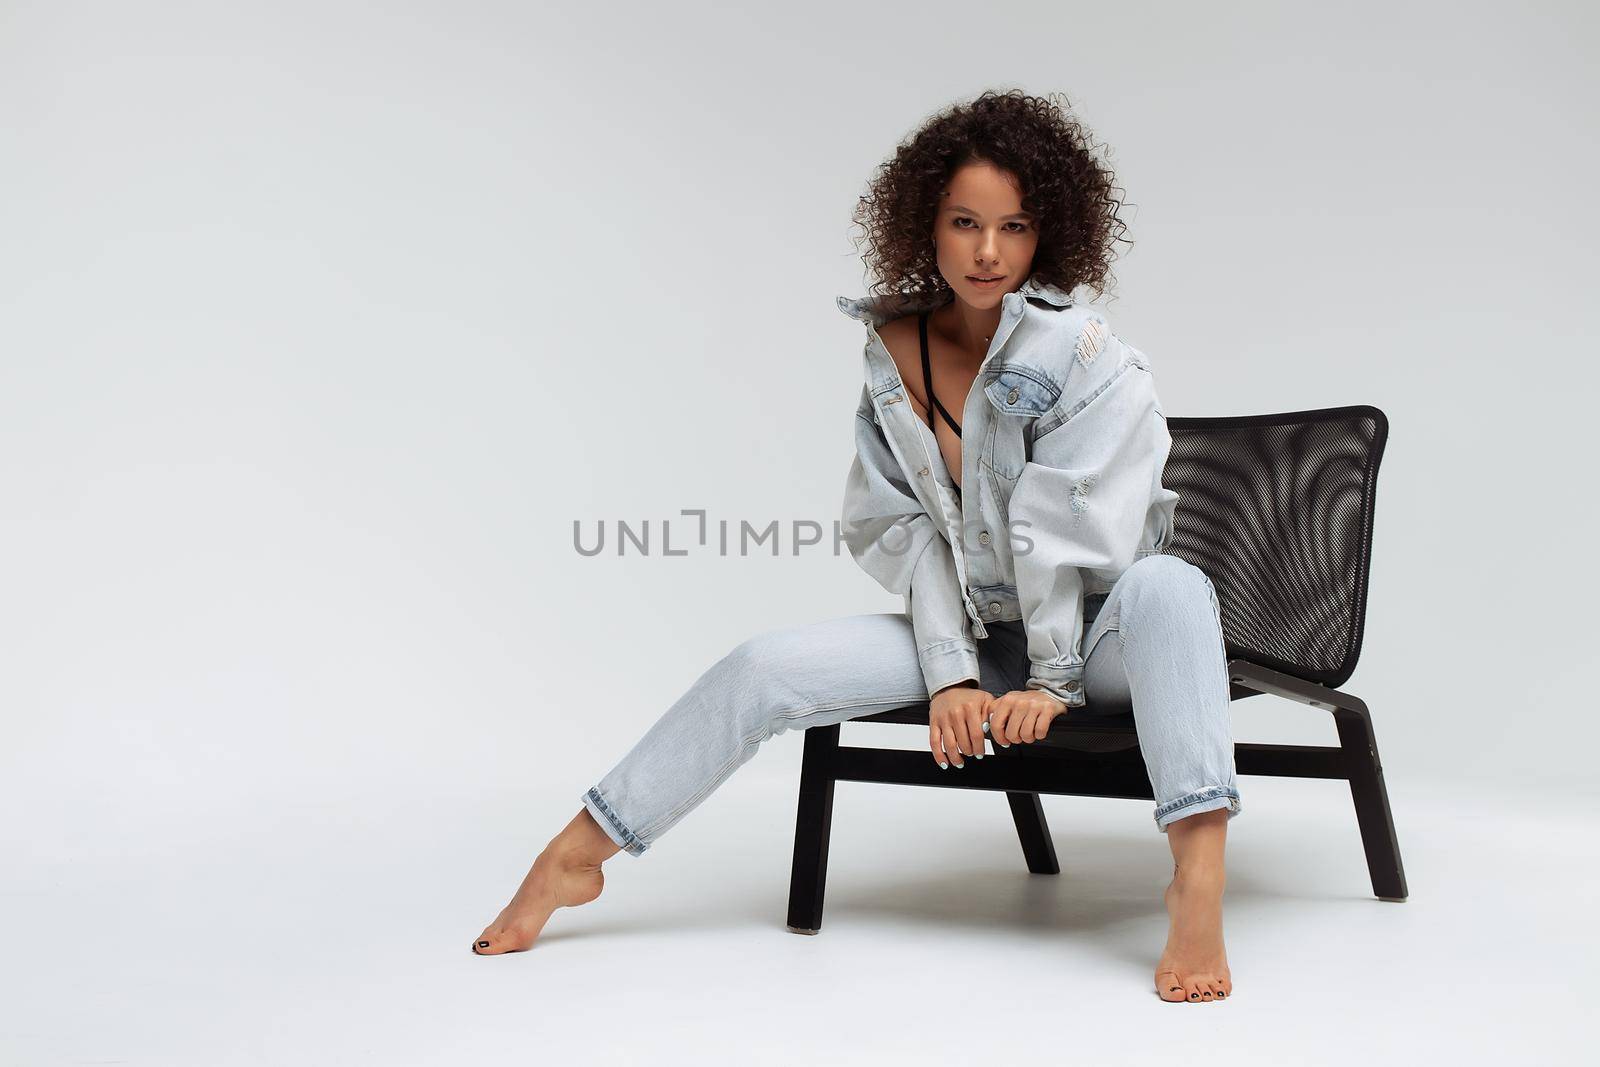 Stylish curly haired woman in denim outfit by 3KStudio